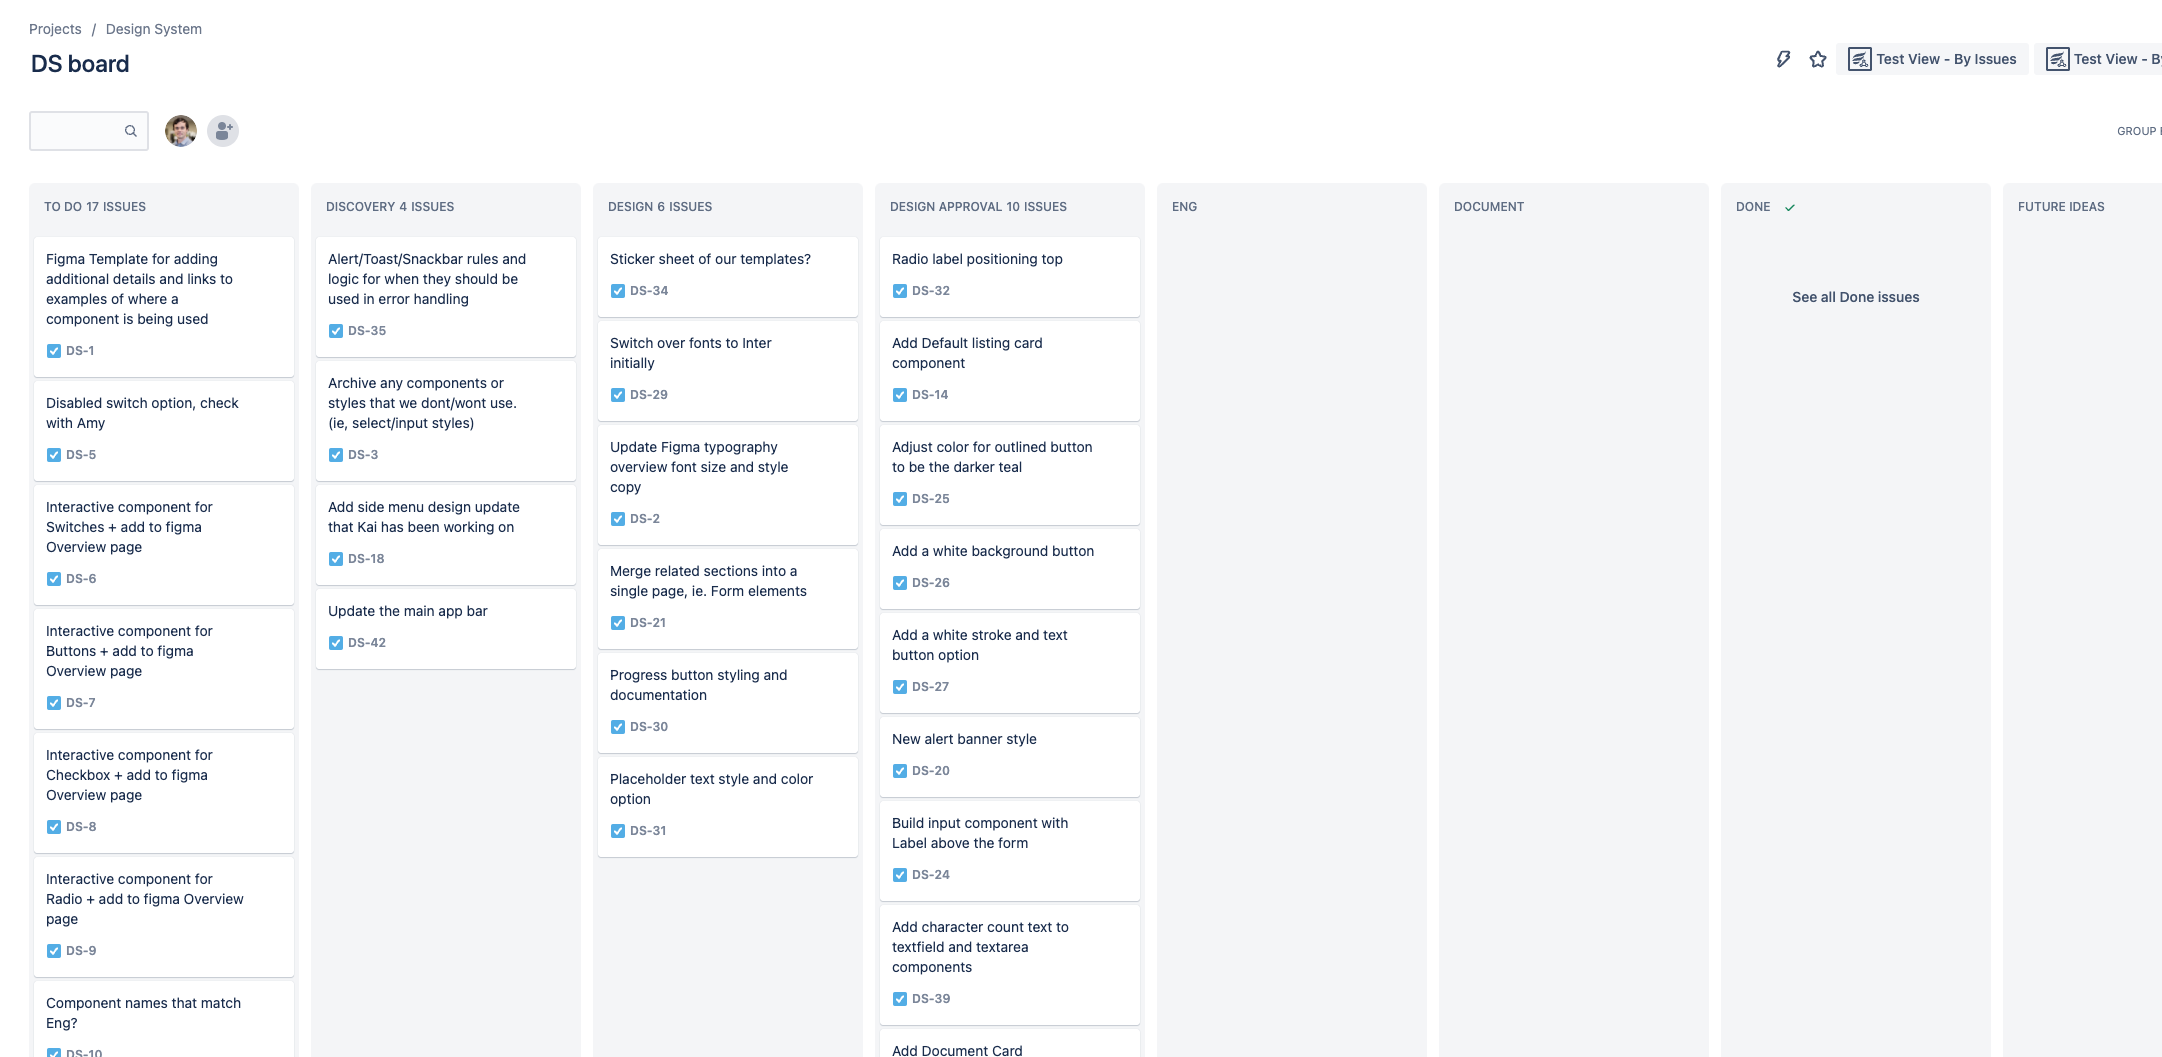 Jira board with multiple columns showing what design system tickets were in progress